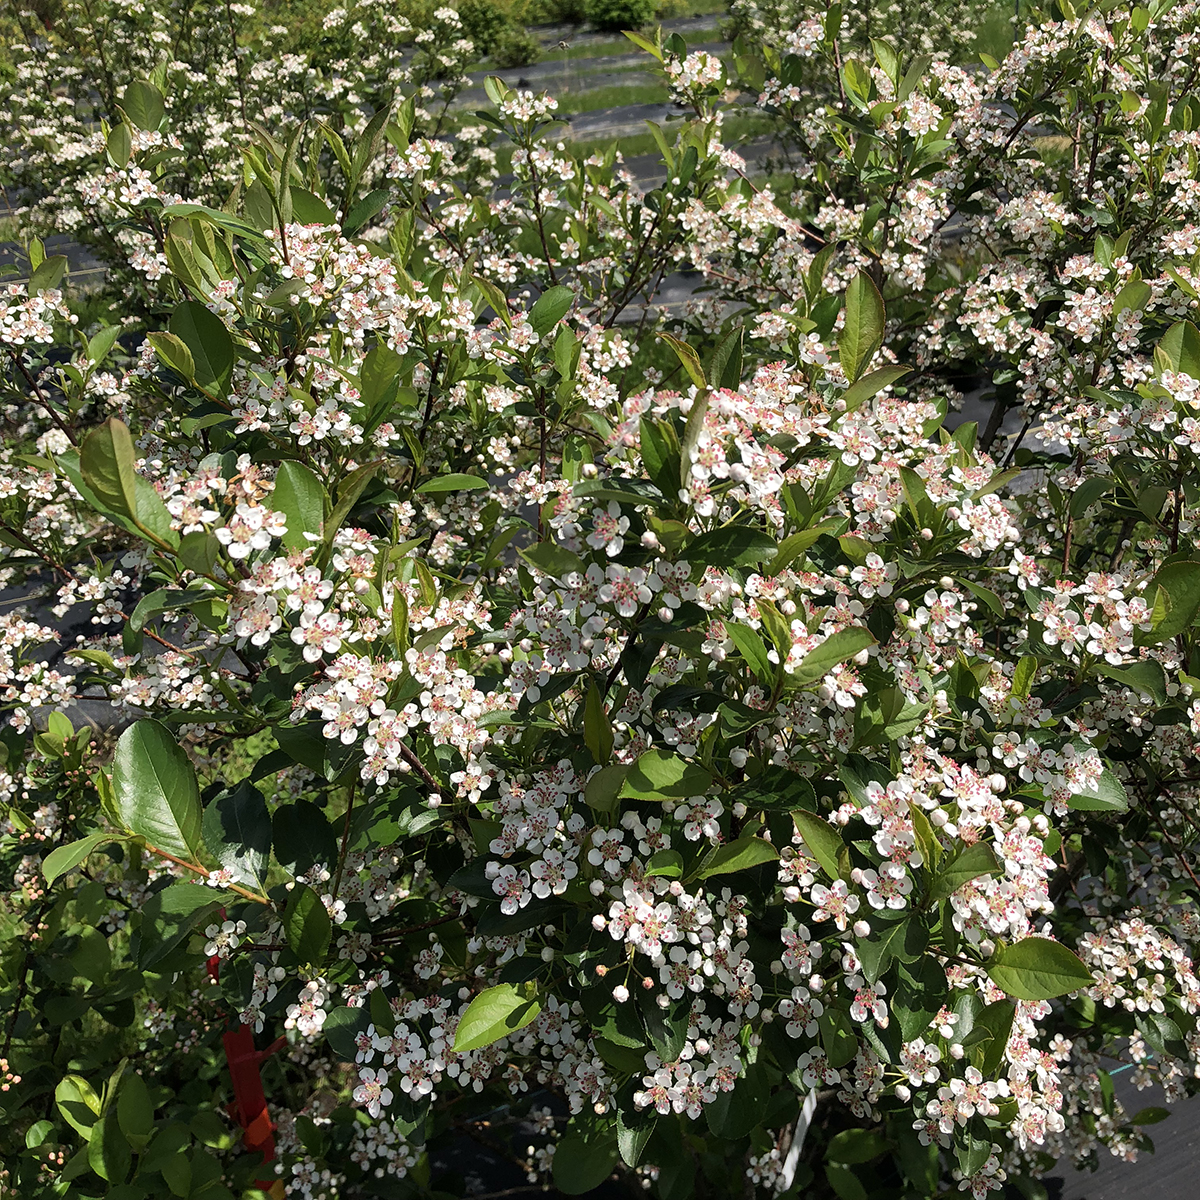 Low Scape Snowfire aronia covered in white flowers. 